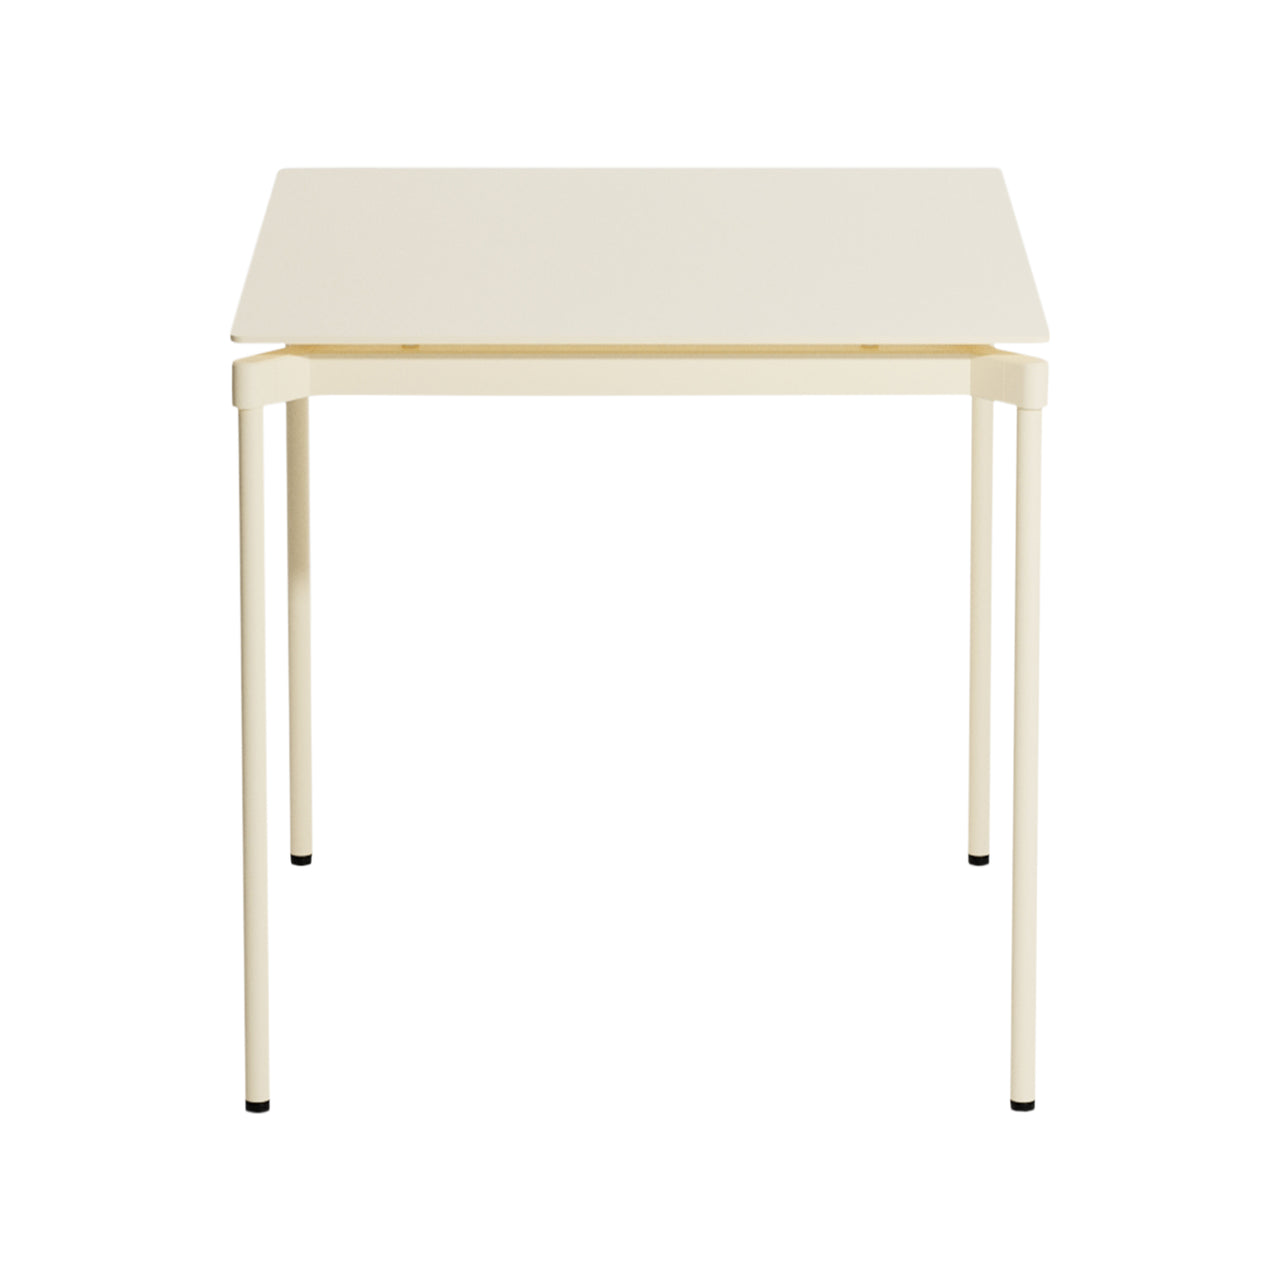 Fromme Dining Table: Ivory